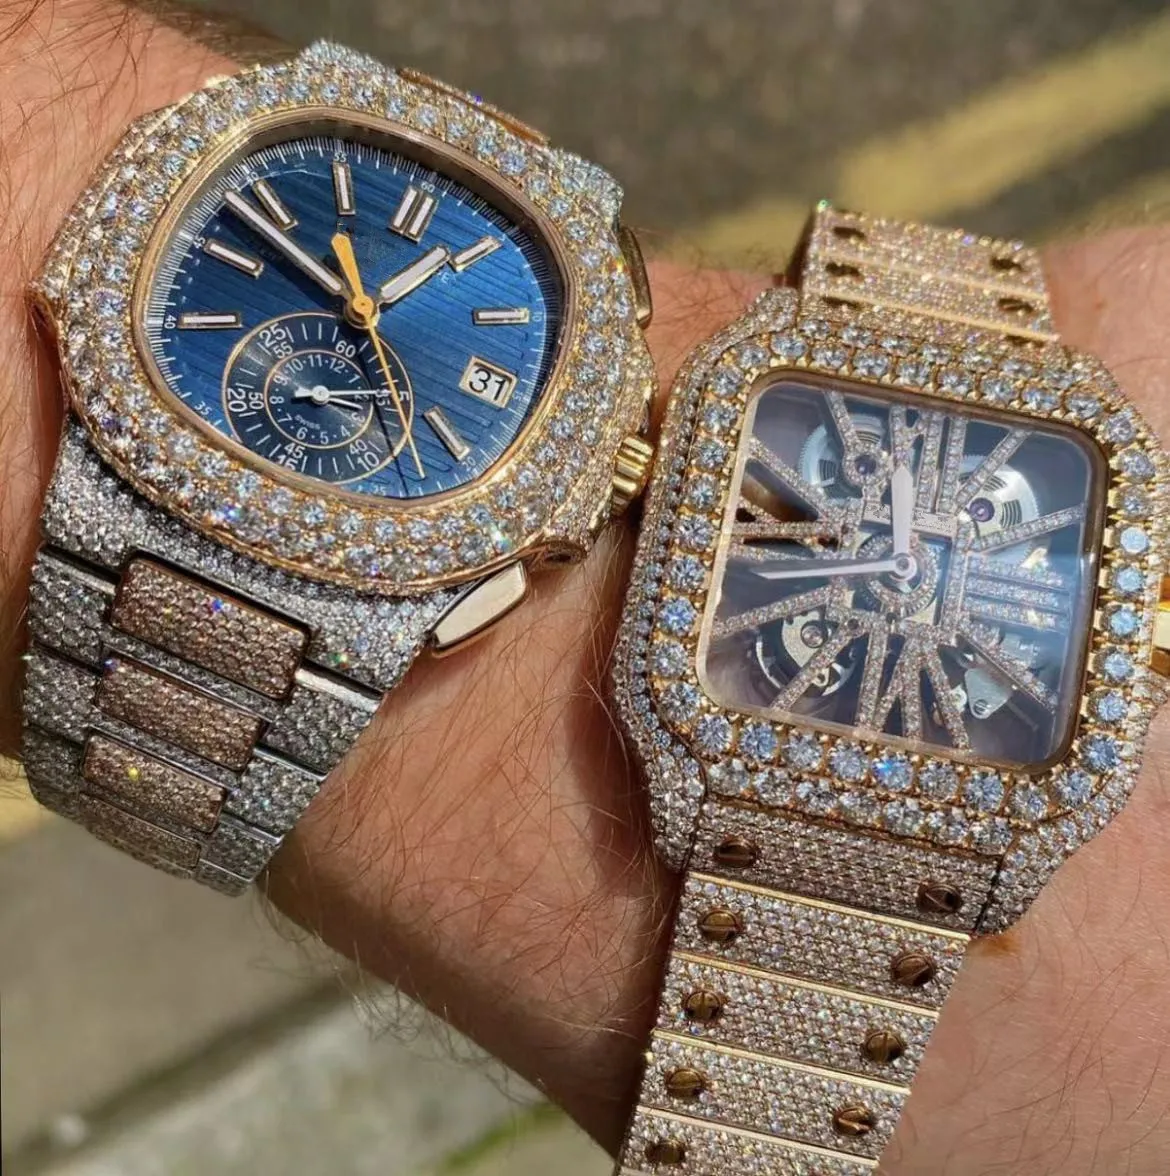 Luxury Men Watches Iced Out Moissanite Diamonds Watch Automatic Setting Hip  Hop Stylish Labor Cost For Each Diamond - Buy Moissanite Diamond Watch,Iced  Out Watch,Luxury Watch Product on 